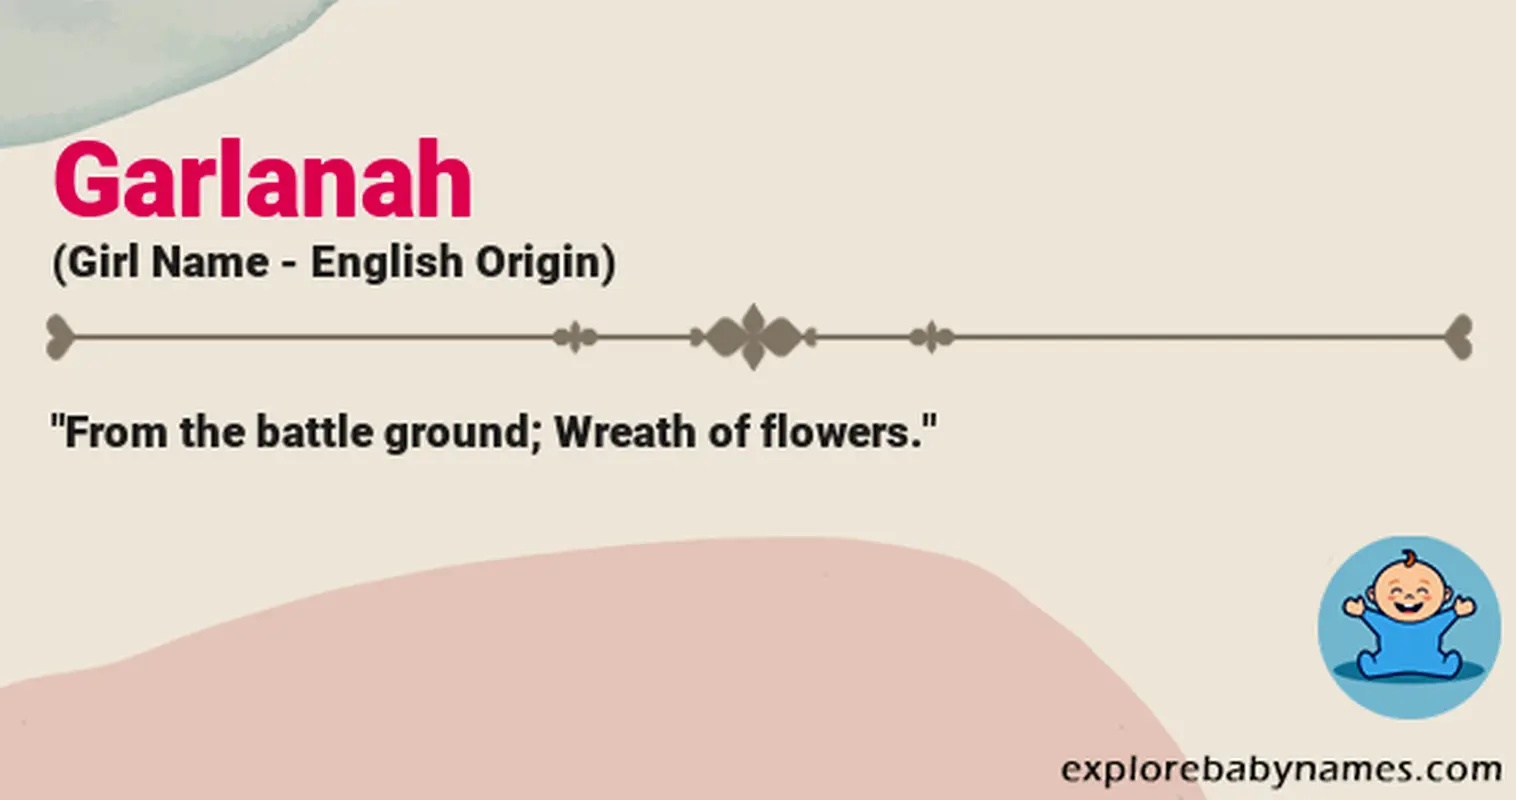 Meaning of Garlanah